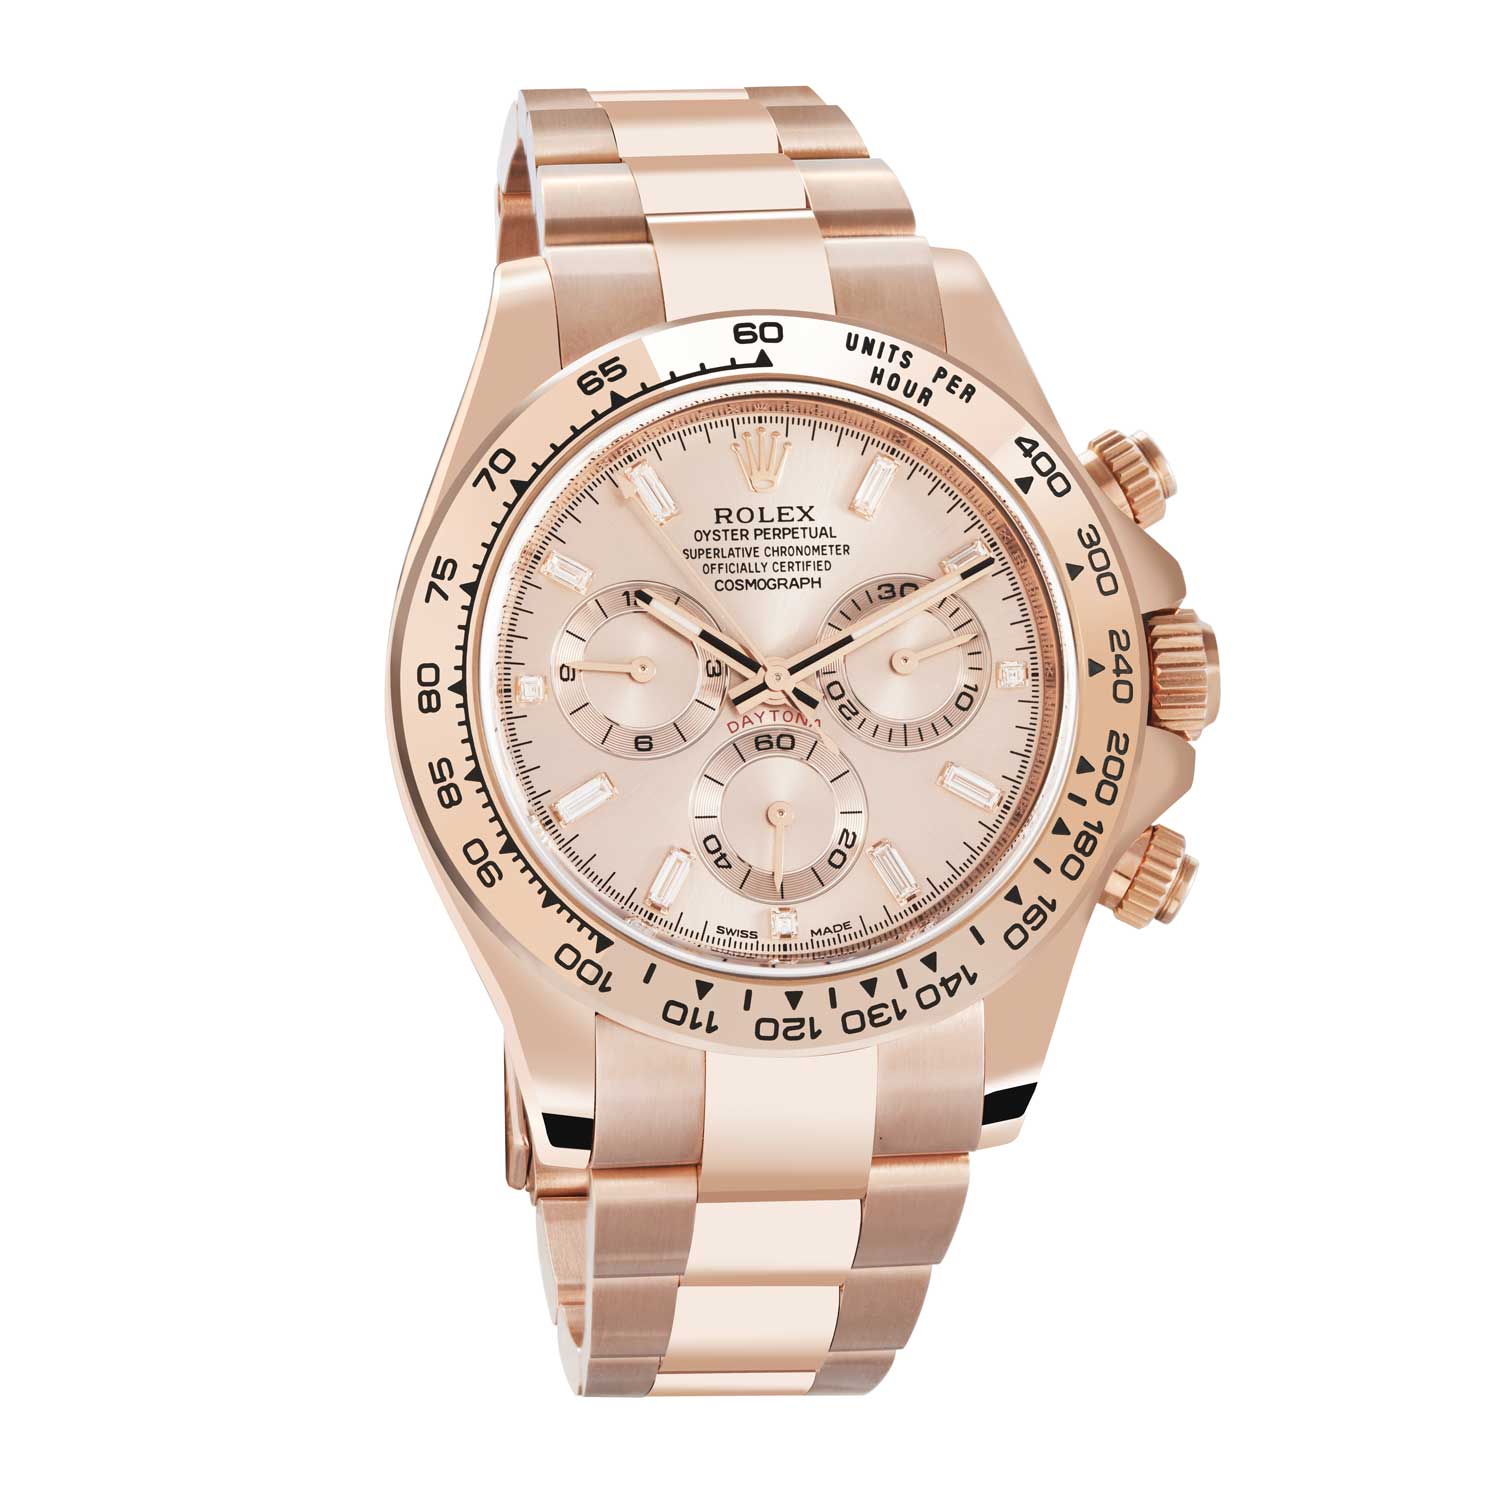 The 116505 in full Everose gold with a sundust dial and baguette diamond indexes. Tone on tone mood. (Image: Rolex)